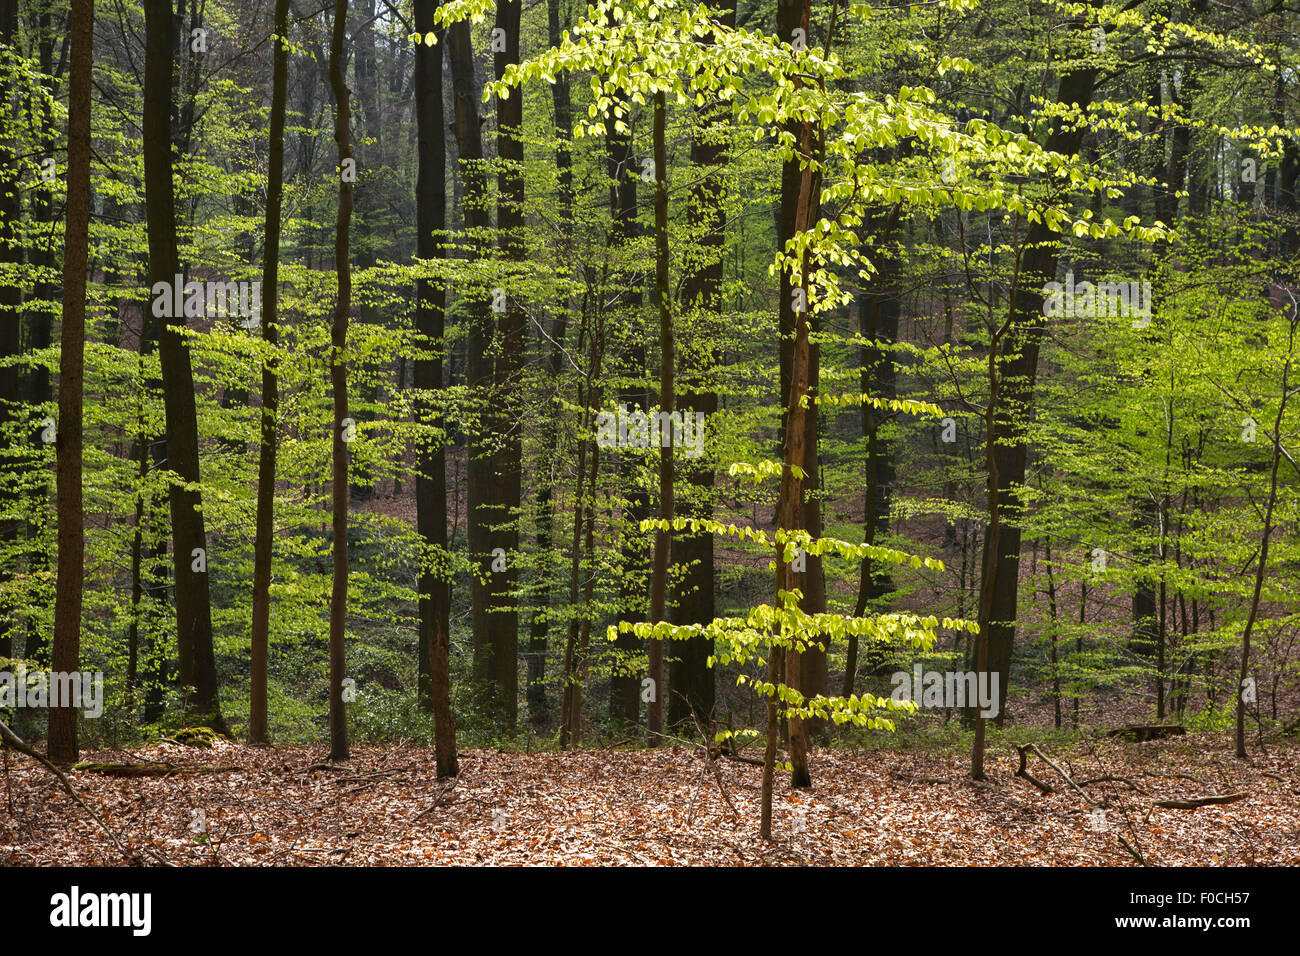 Beech trees (Fagus sylvatica) in broadleaved forest in spring Stock Photo